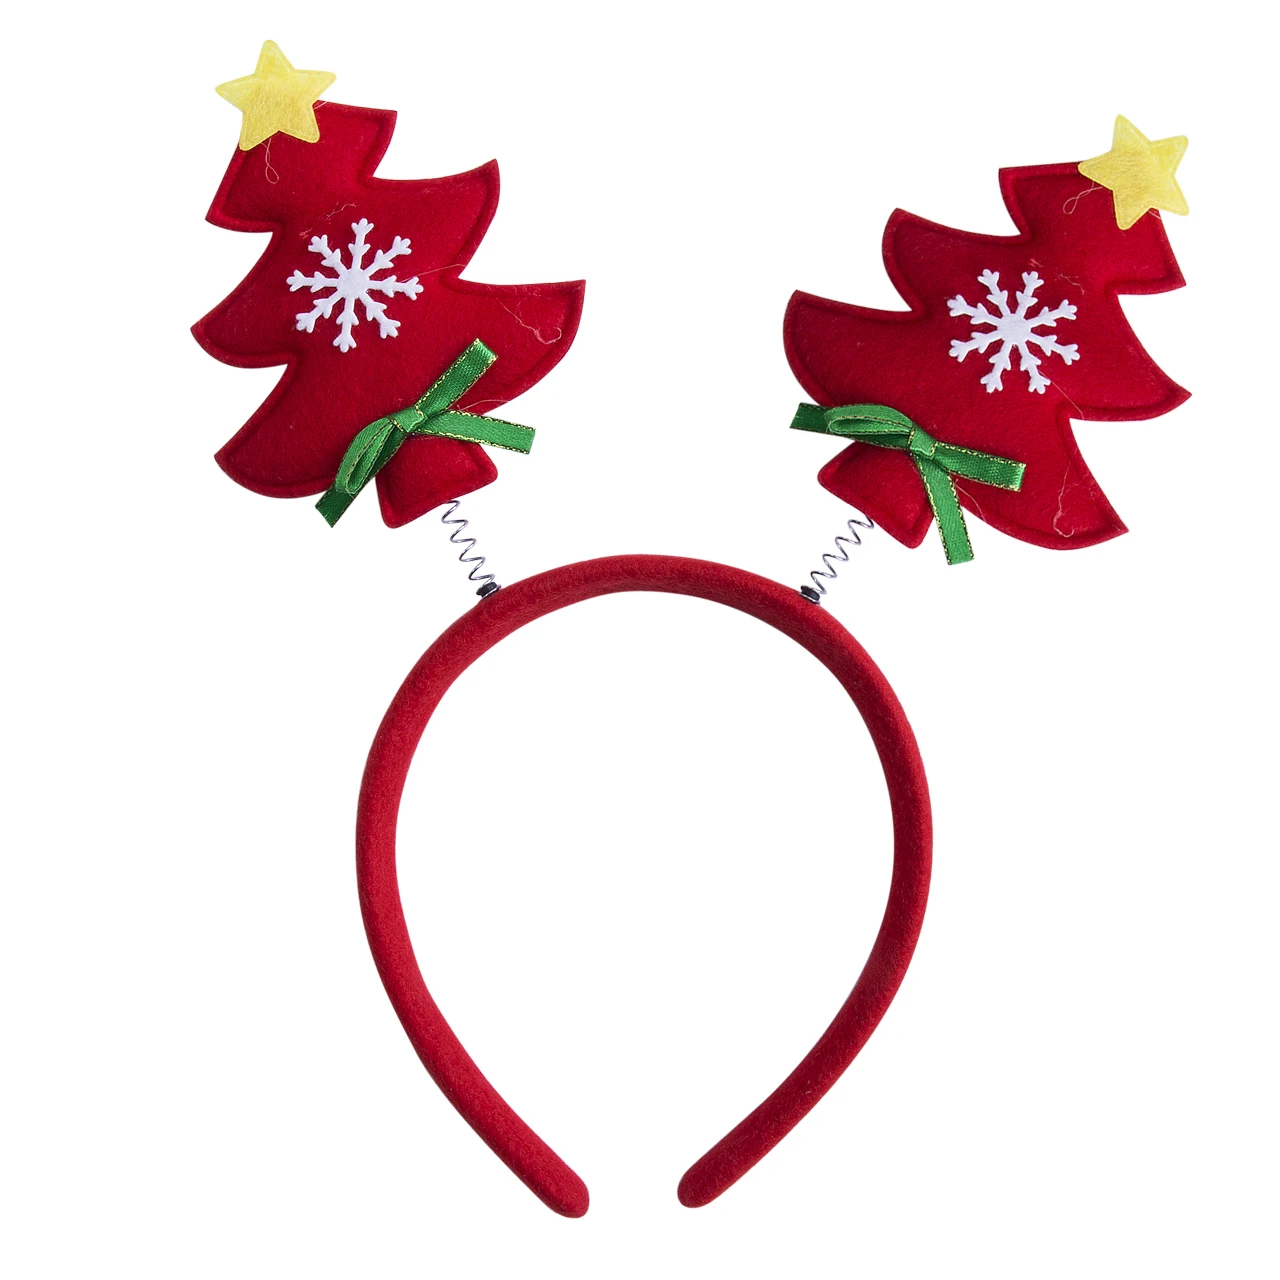 ITFABS Newest Arrivals Fashion Hot Christmas Hair Band Headband Accessories Red Green Tree Xmas Gift Headwear Decoration |